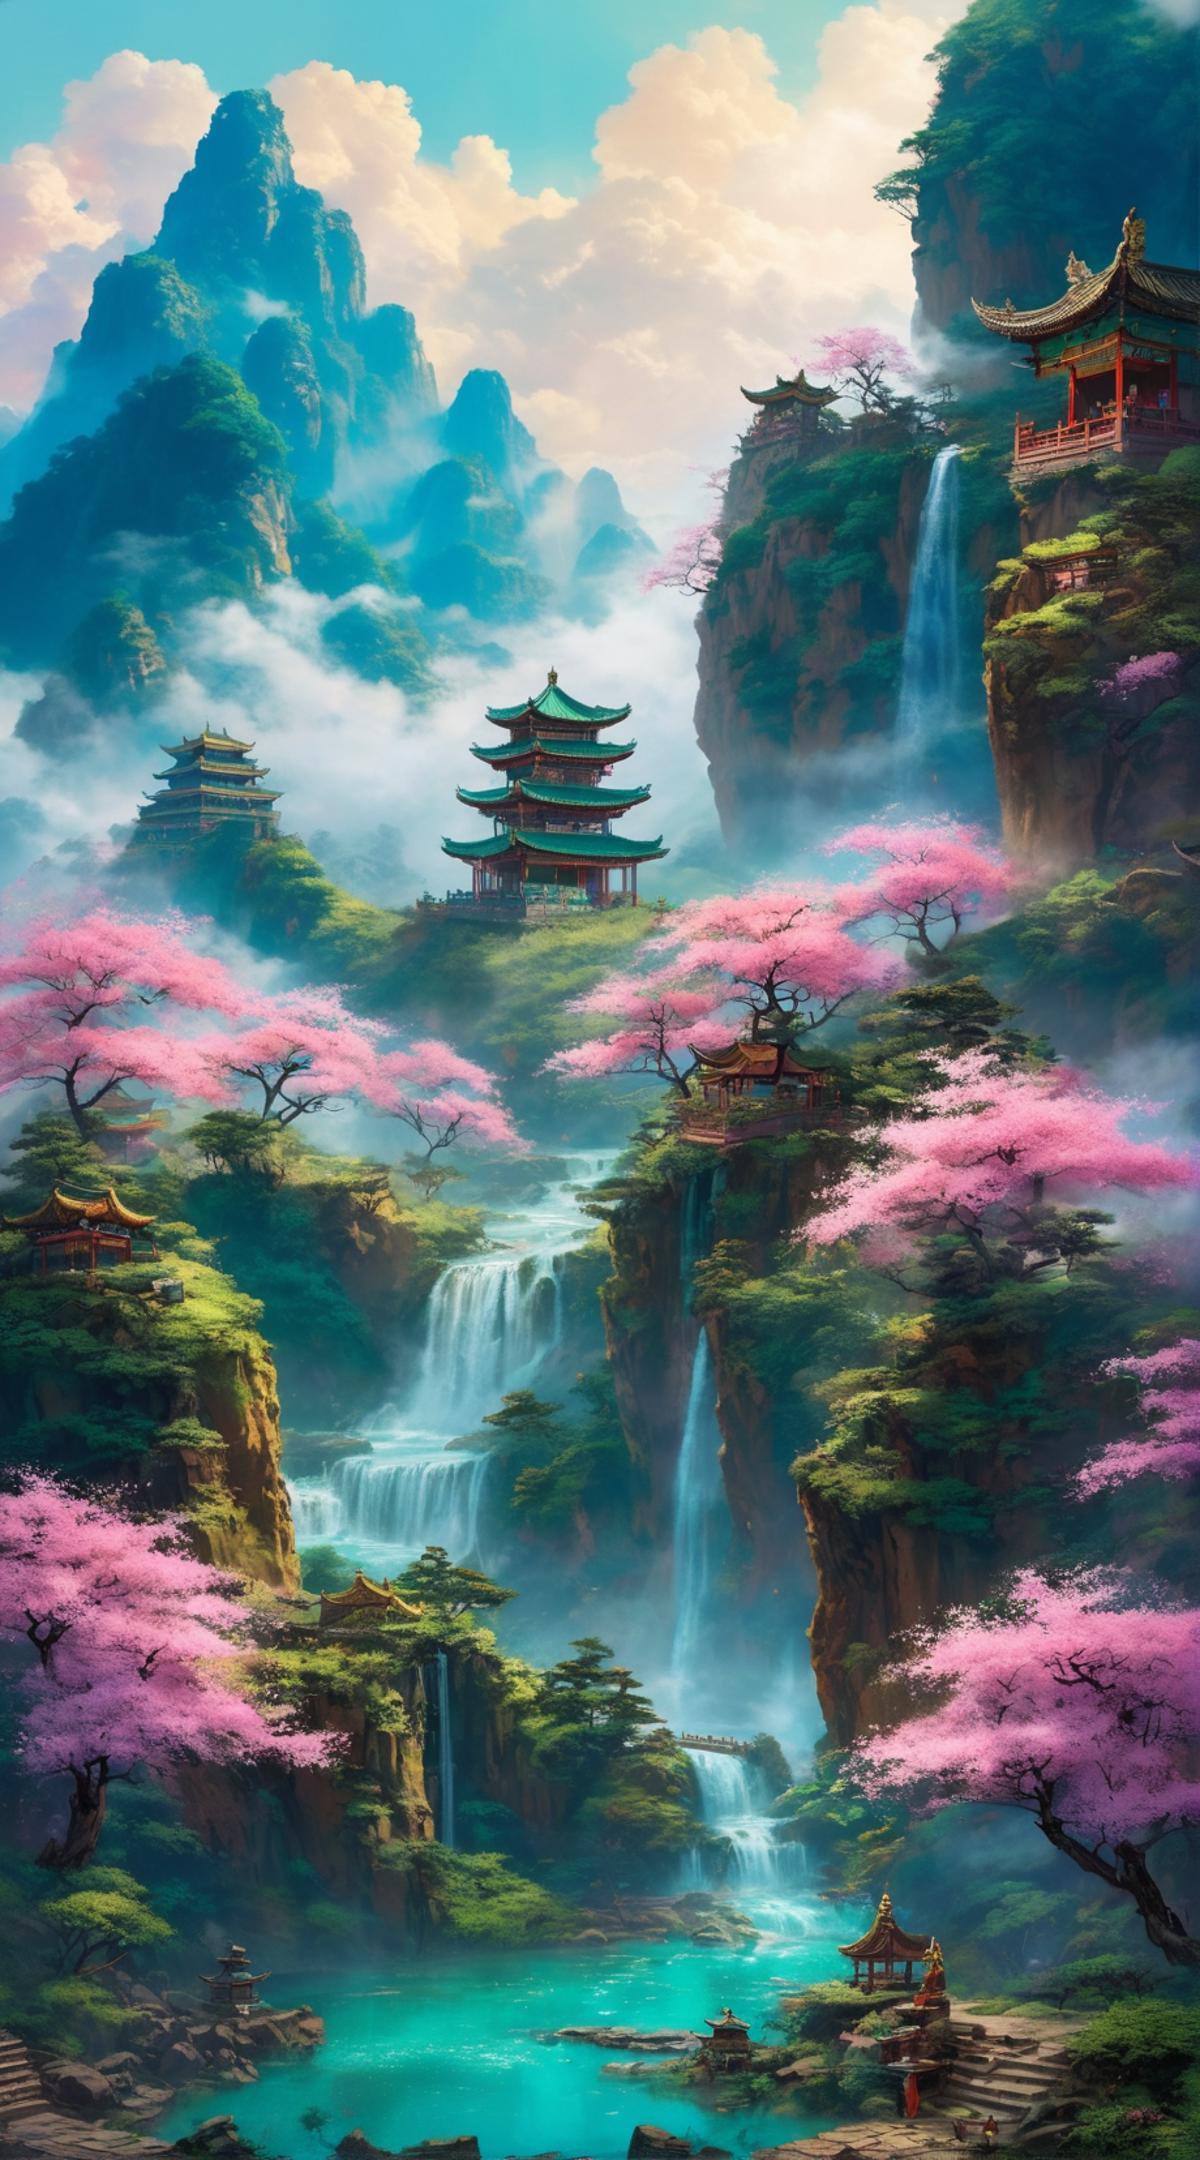 Ancient Temple with Waterfall and Pink Cherry Blossoms in the Background